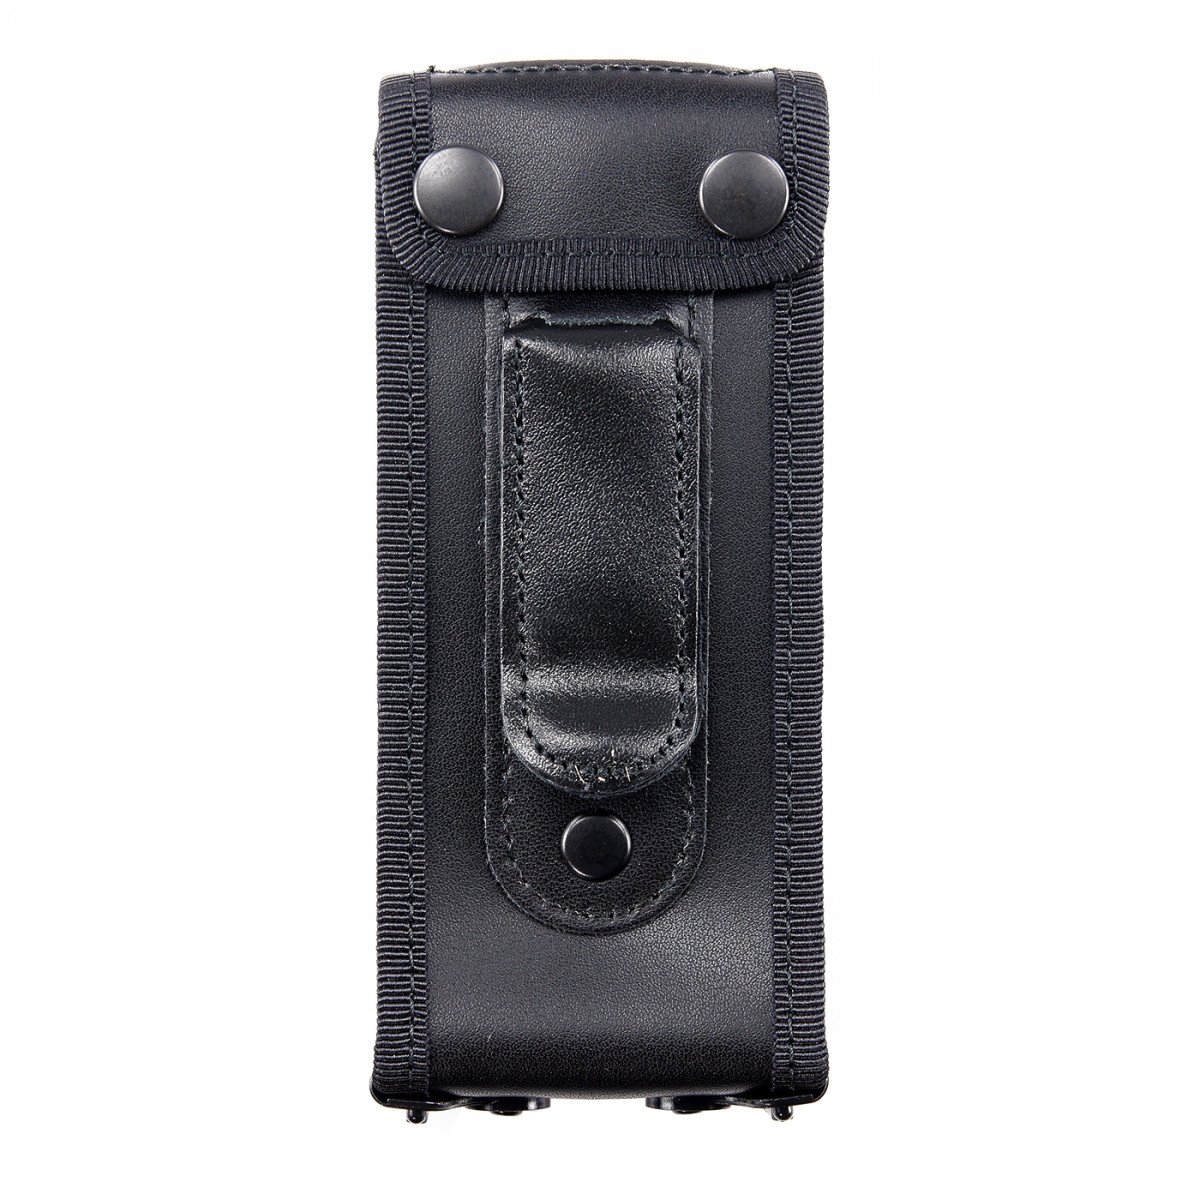 SEPURA leather pouch with belt clip for STP8/9000 300-00233